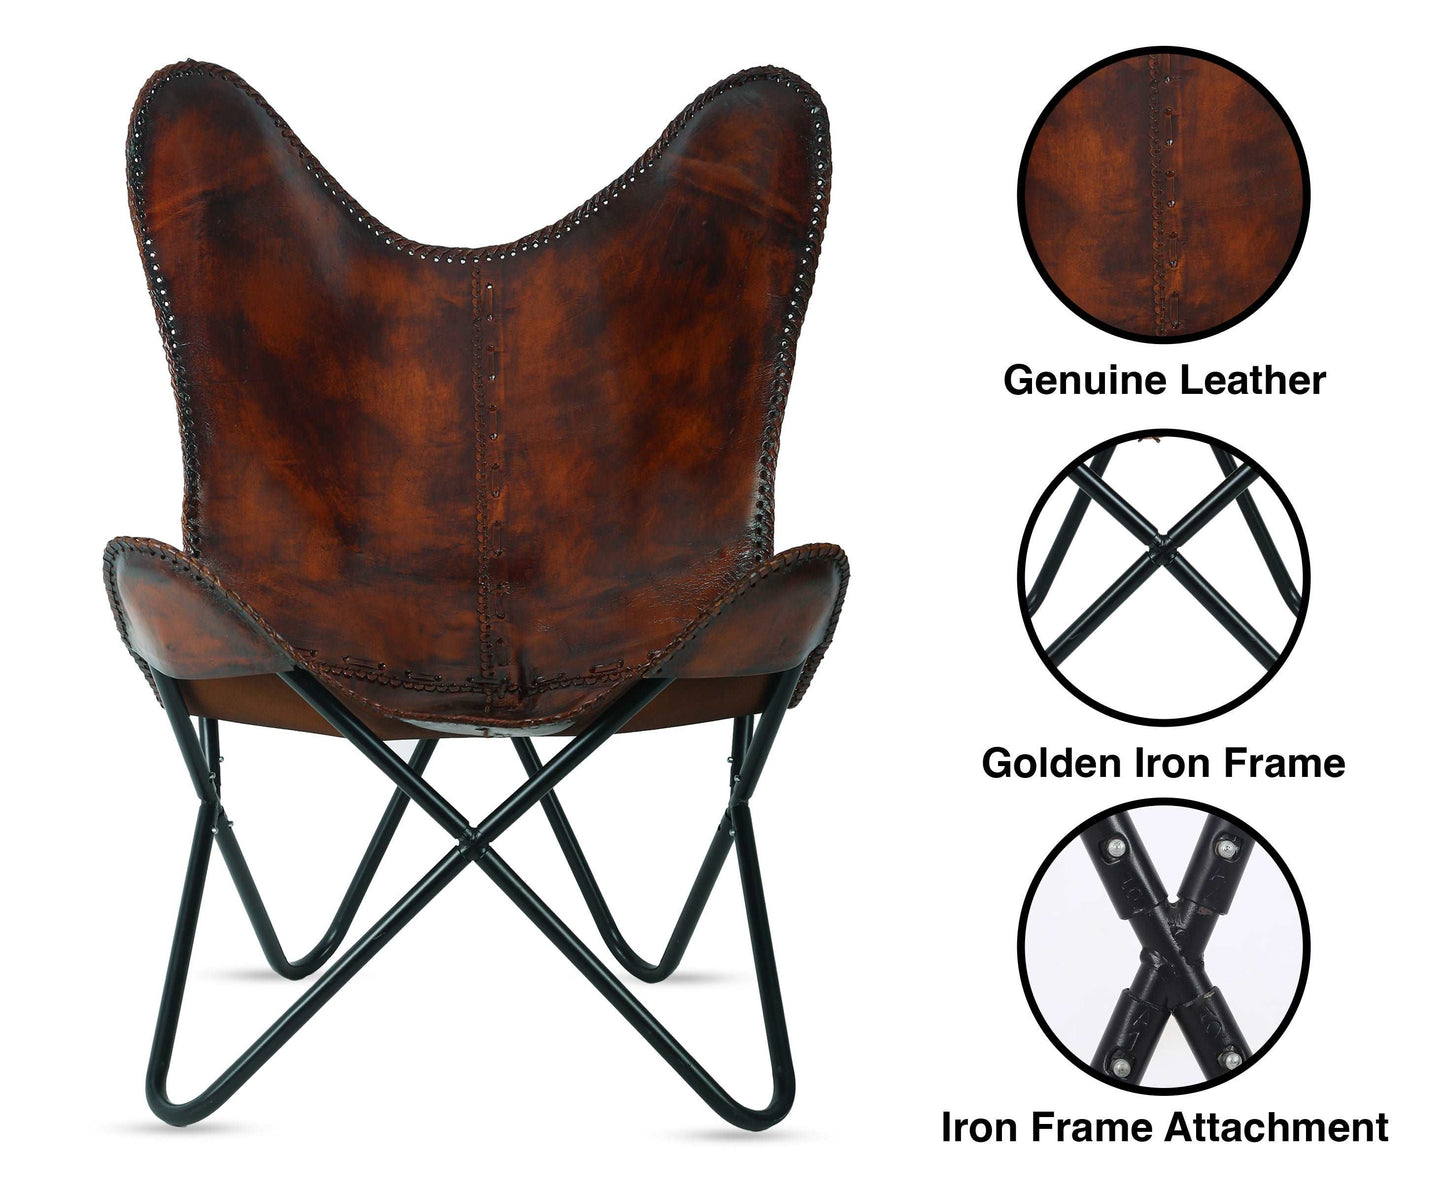 Handmade Leather Butterfly Chair Living Room- Side Hand Stich Leather Chair-Handmade with Powder Coated Folding Black Iron Frame